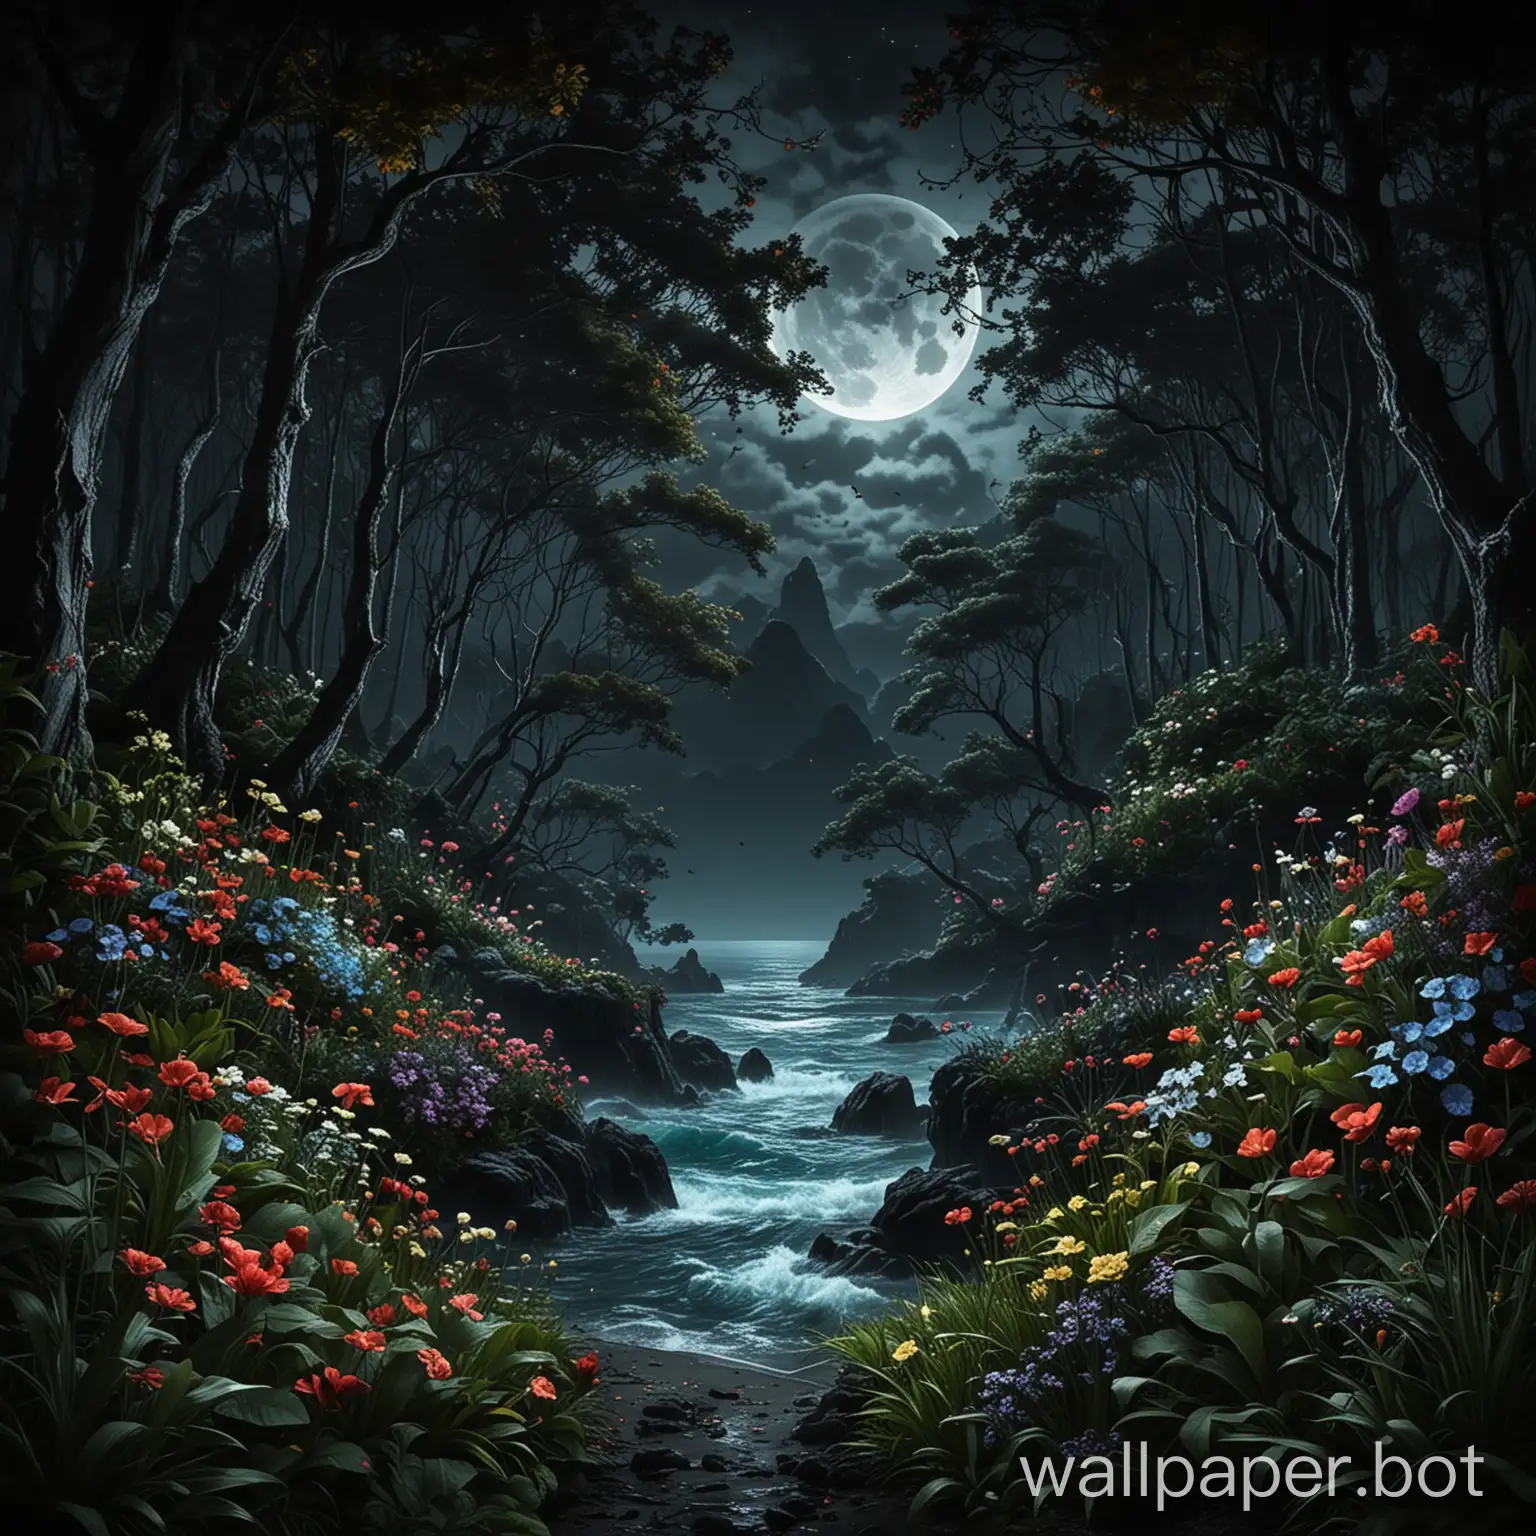 Enchanted-Dark-Forest-with-Moonlit-Sea-and-Blooming-Flowers